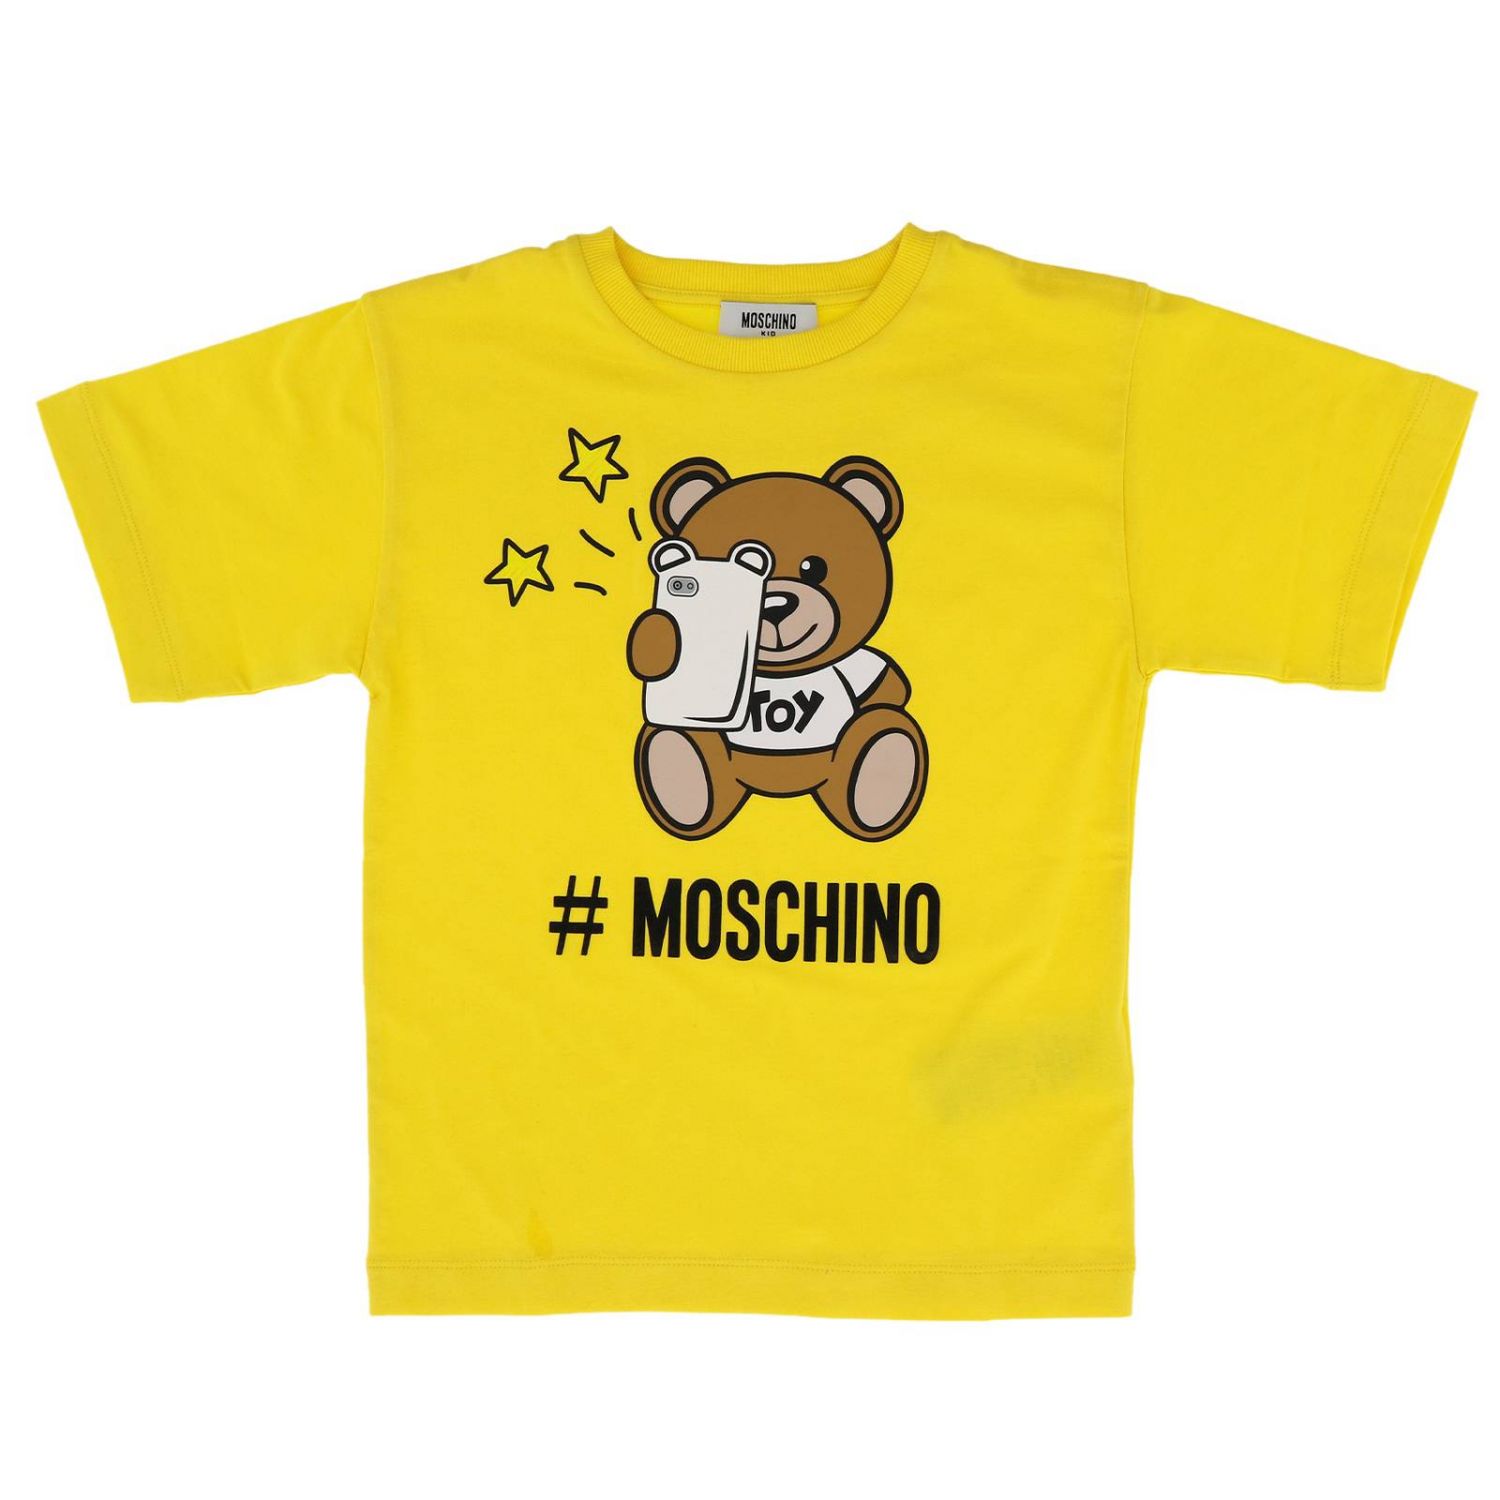 Moschino Kid Outlet: t-shirt for boys - Yellow | Moschino Kid t-shirt ...